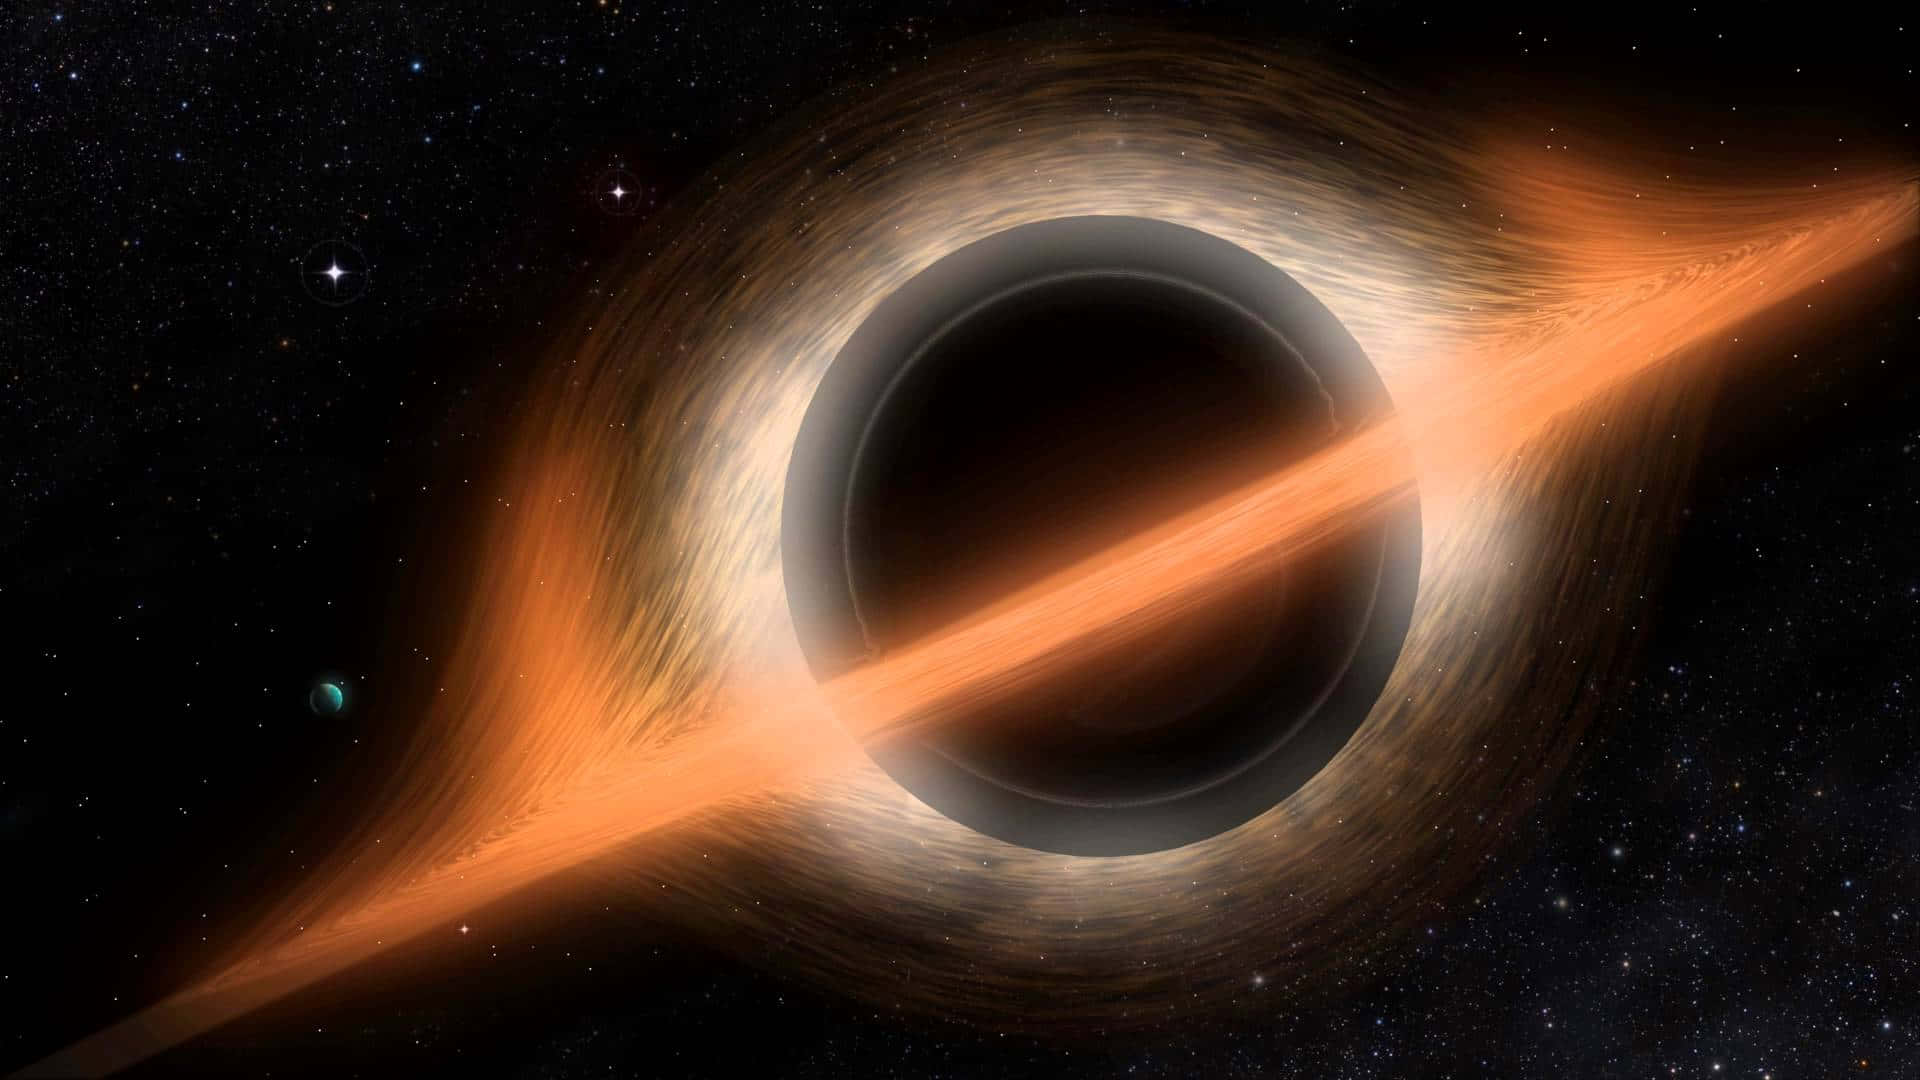 An expanding black hole from the sci-fi epic Interstellar. Wallpaper